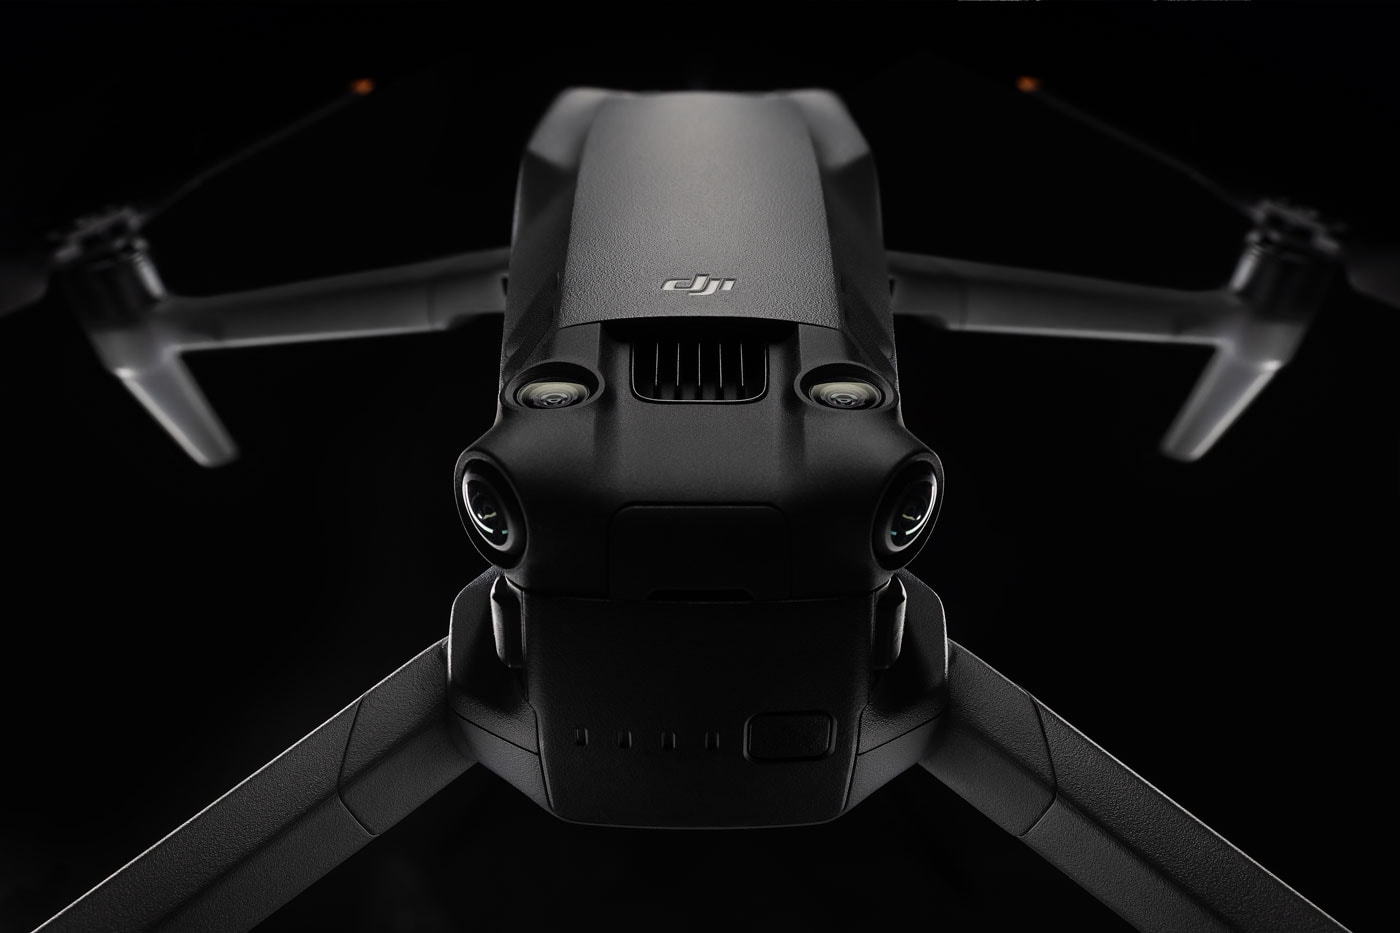 DJI Mavic 3 CINE hasselblad drone release aerial cinematography Tech video 4K flying flight imaging fly more combo 